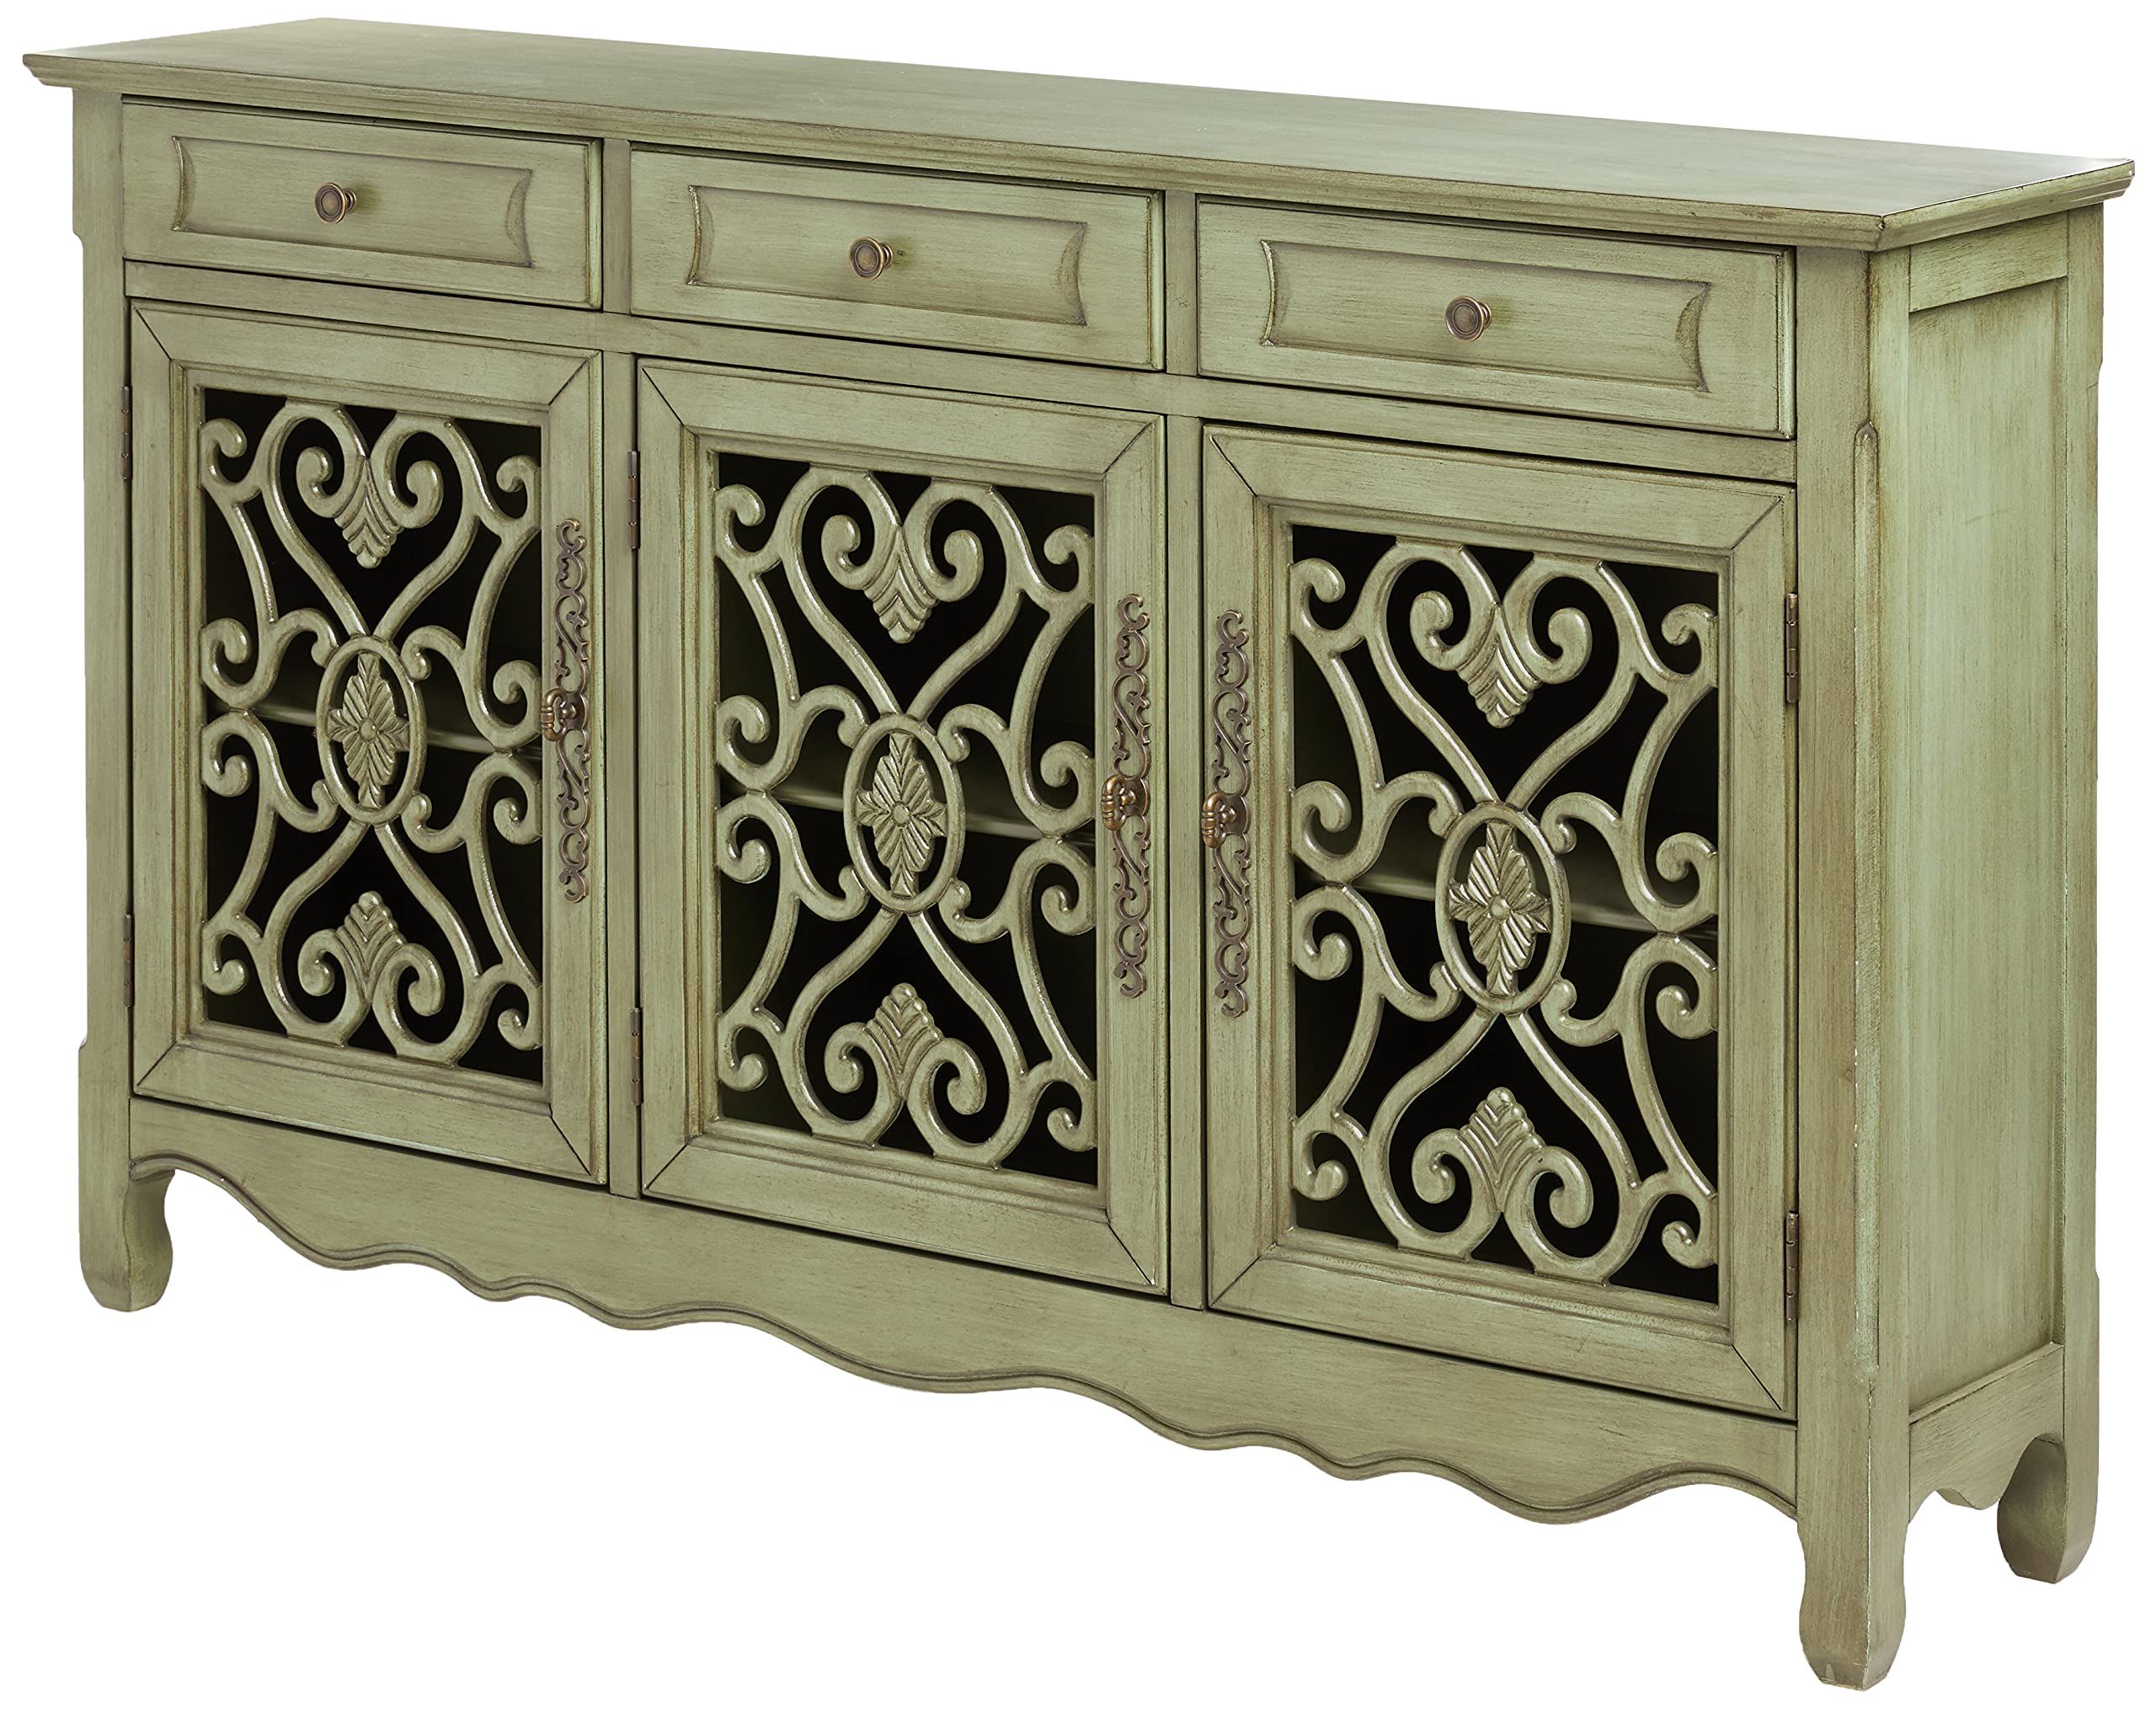 Amazon: Coaster Home Furnishings Madeline 3 Door Accent Cabinet Antique  Green : Home & Kitchen Regarding Most Recent 3 Door Accent Cabinet Sideboards (View 6 of 10)